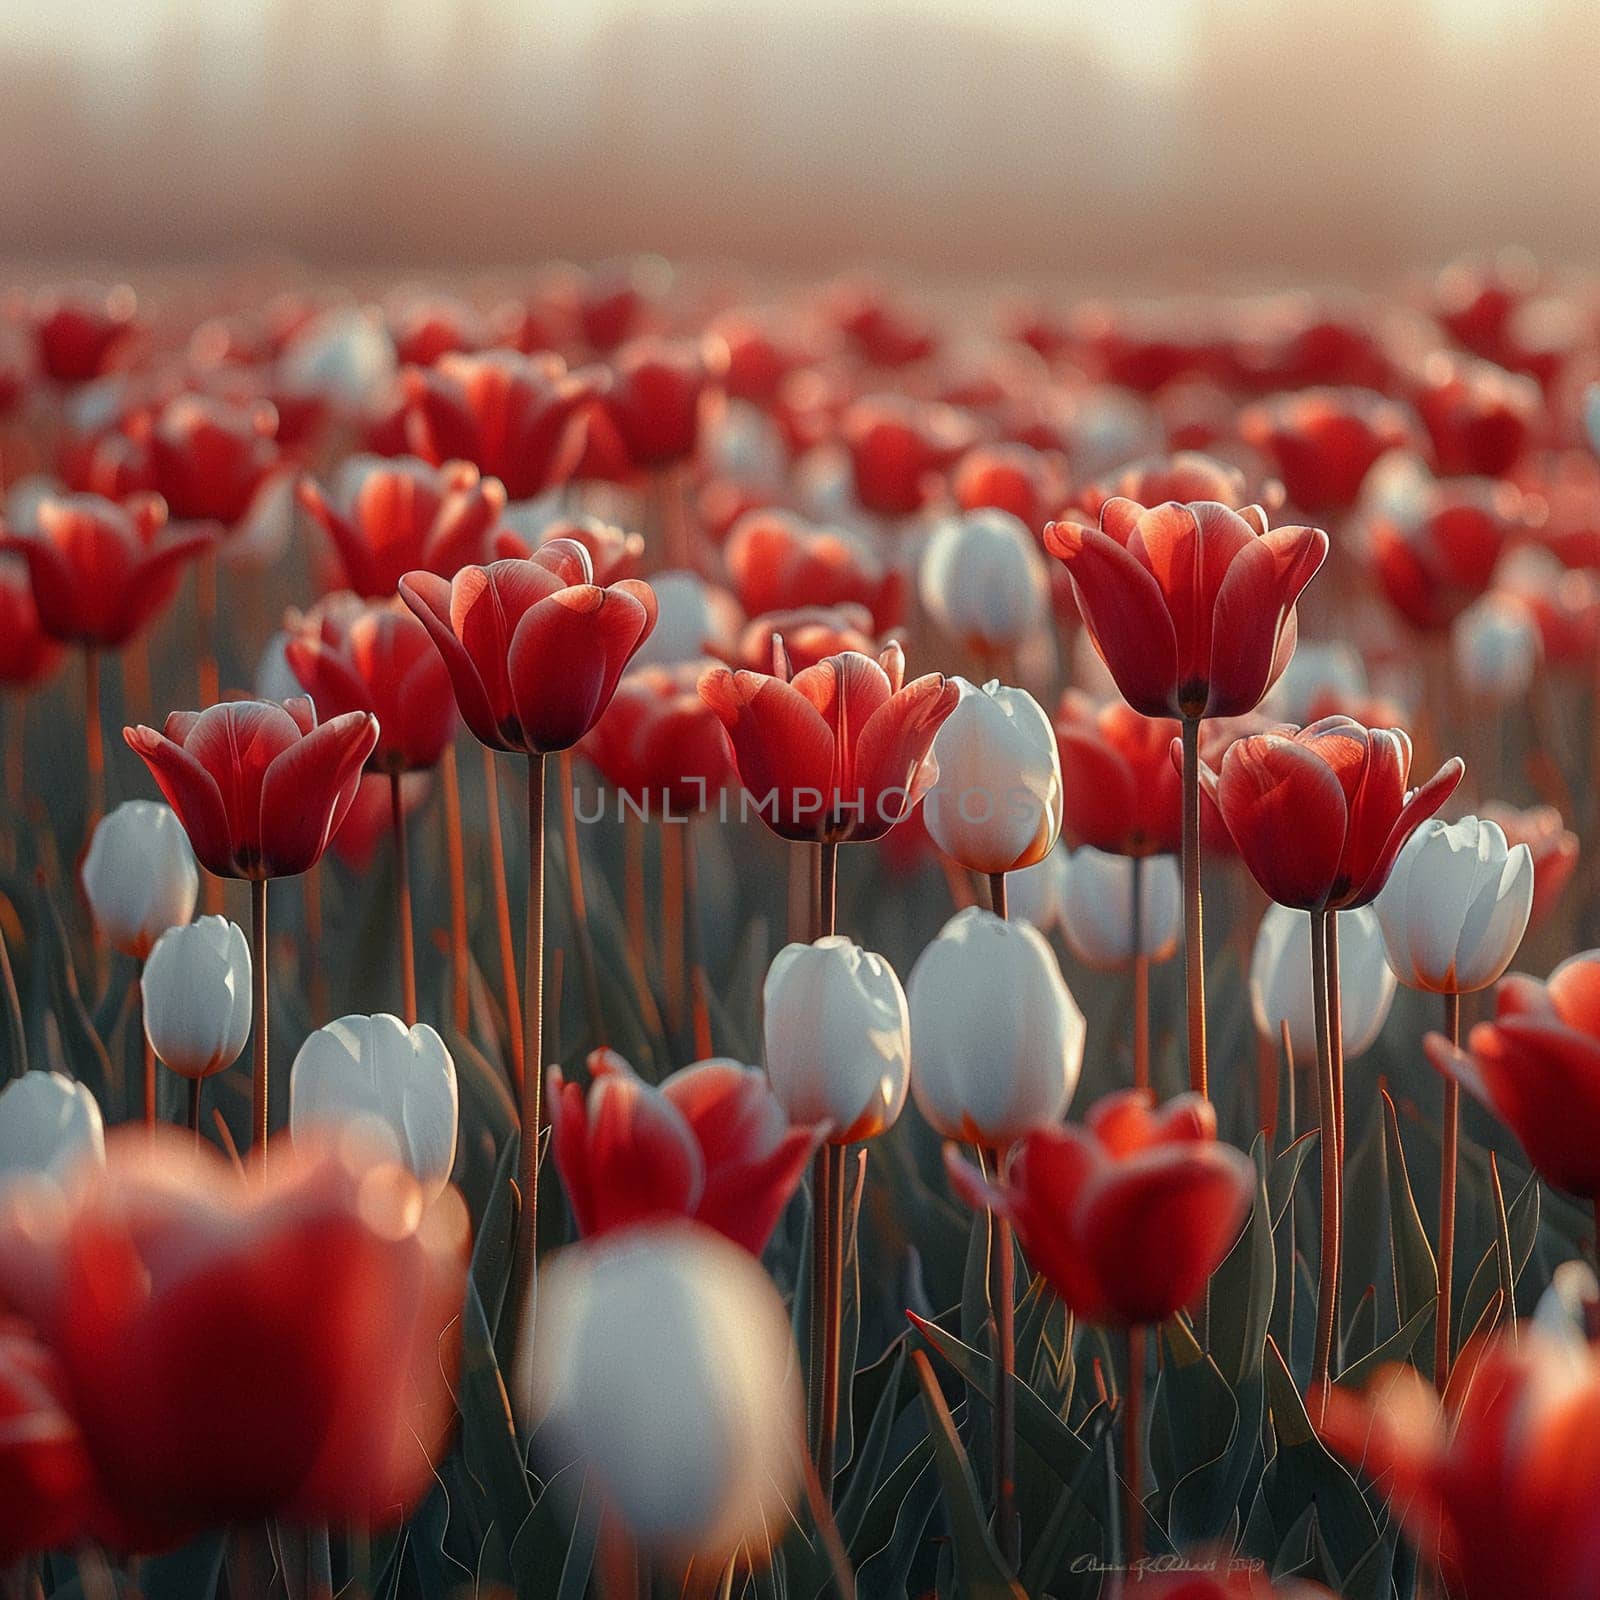 Field of blooming red and white tulips swaying in breeze for Martisor.